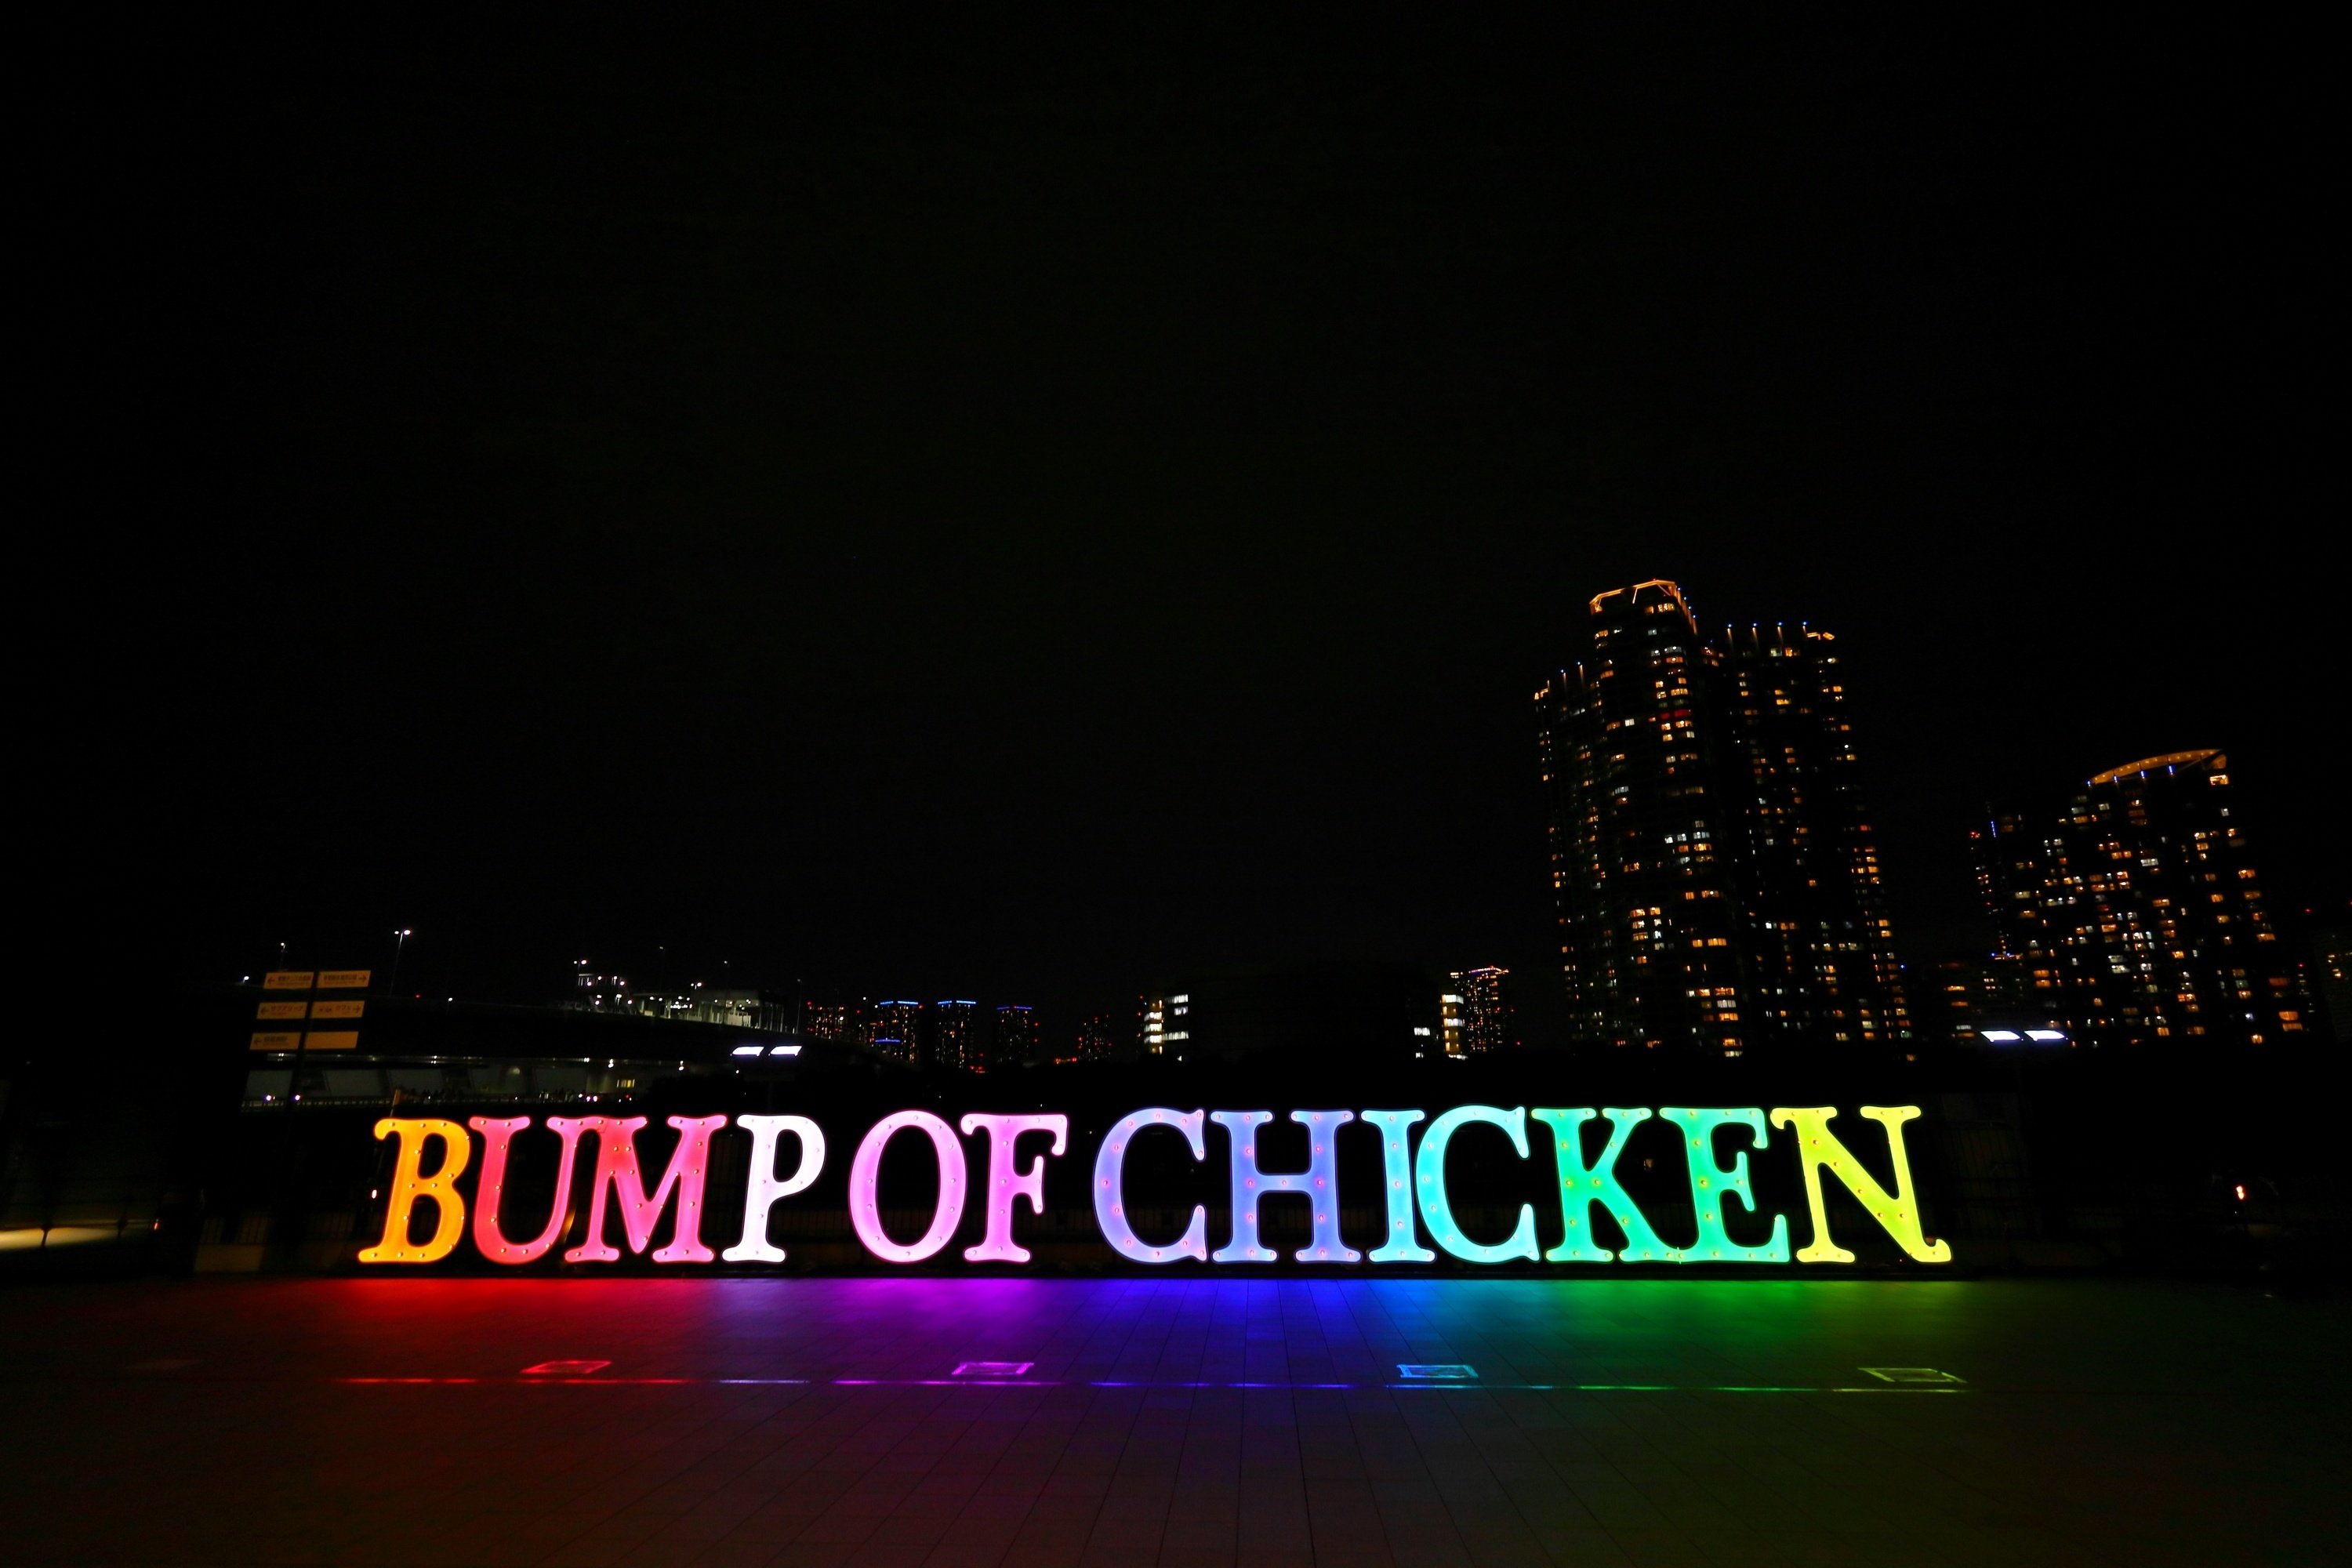 BUMP OF CHICKENツアー「be there」有明アリーナ初日（2/11）感想